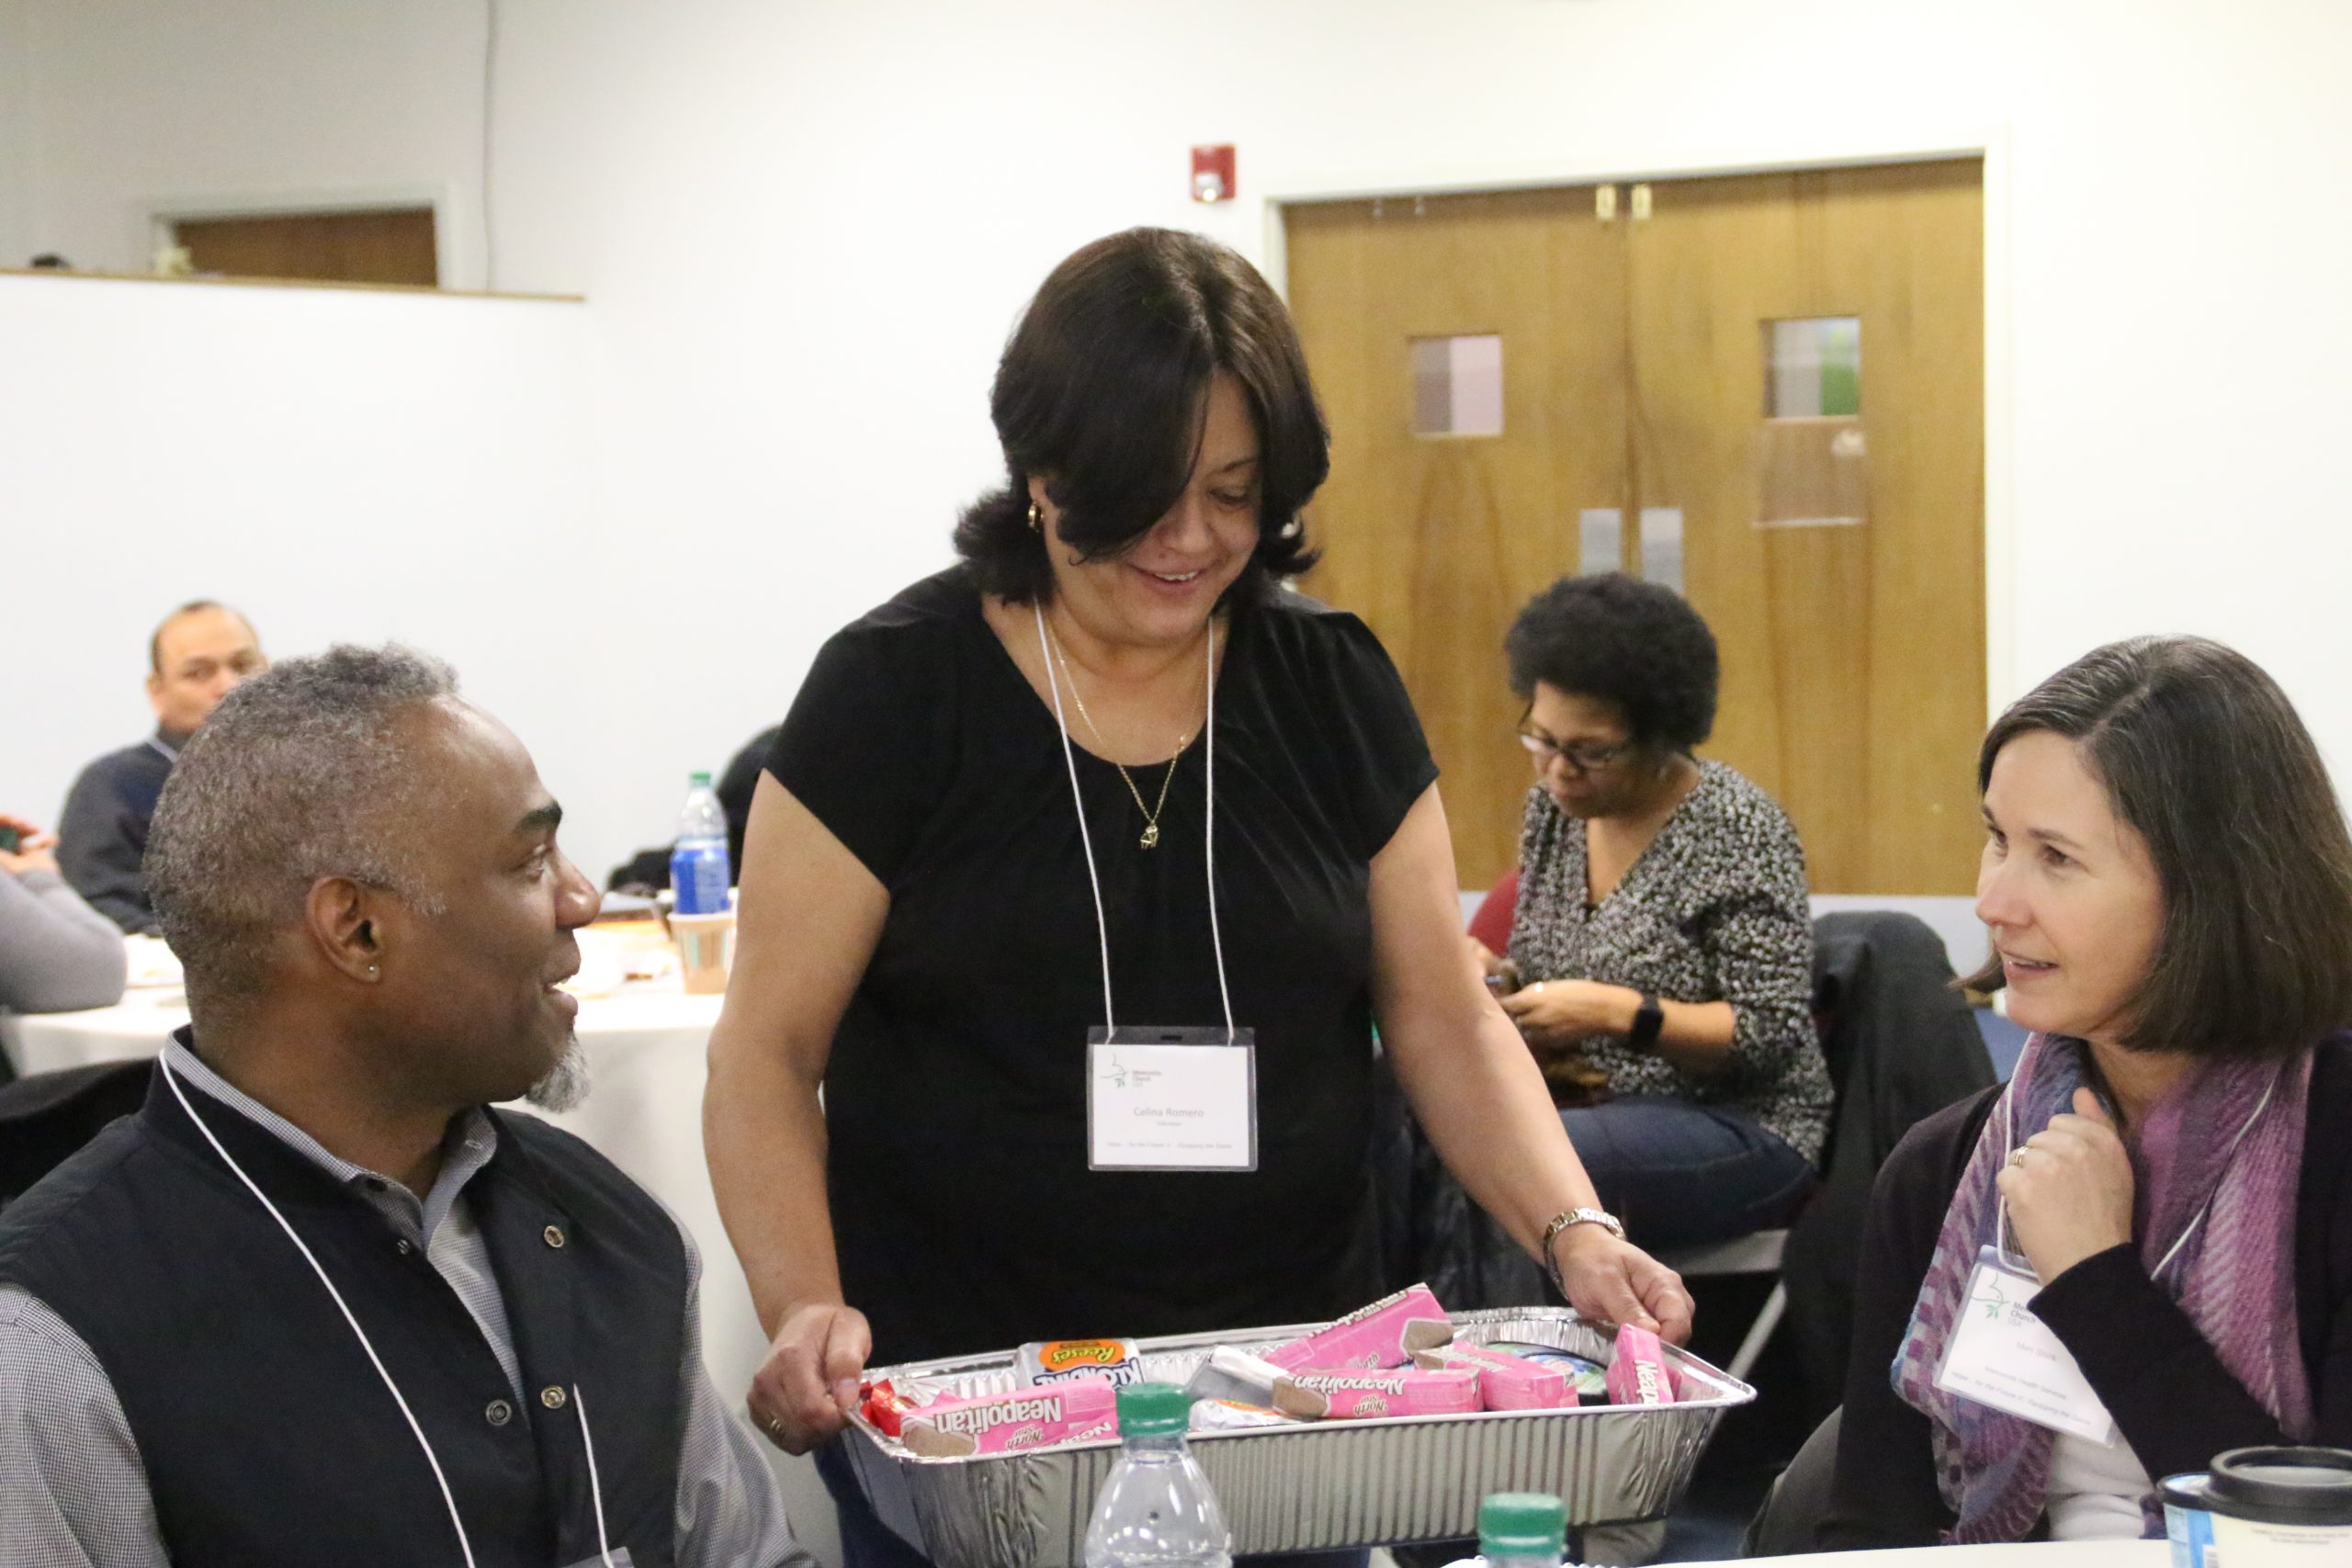 Celina Romero (standing) of Mennonite Education Agency shares with Ewuare Osayande of Mennonite Central Committee and Mim Shirk of MHS as they participate in a work group.